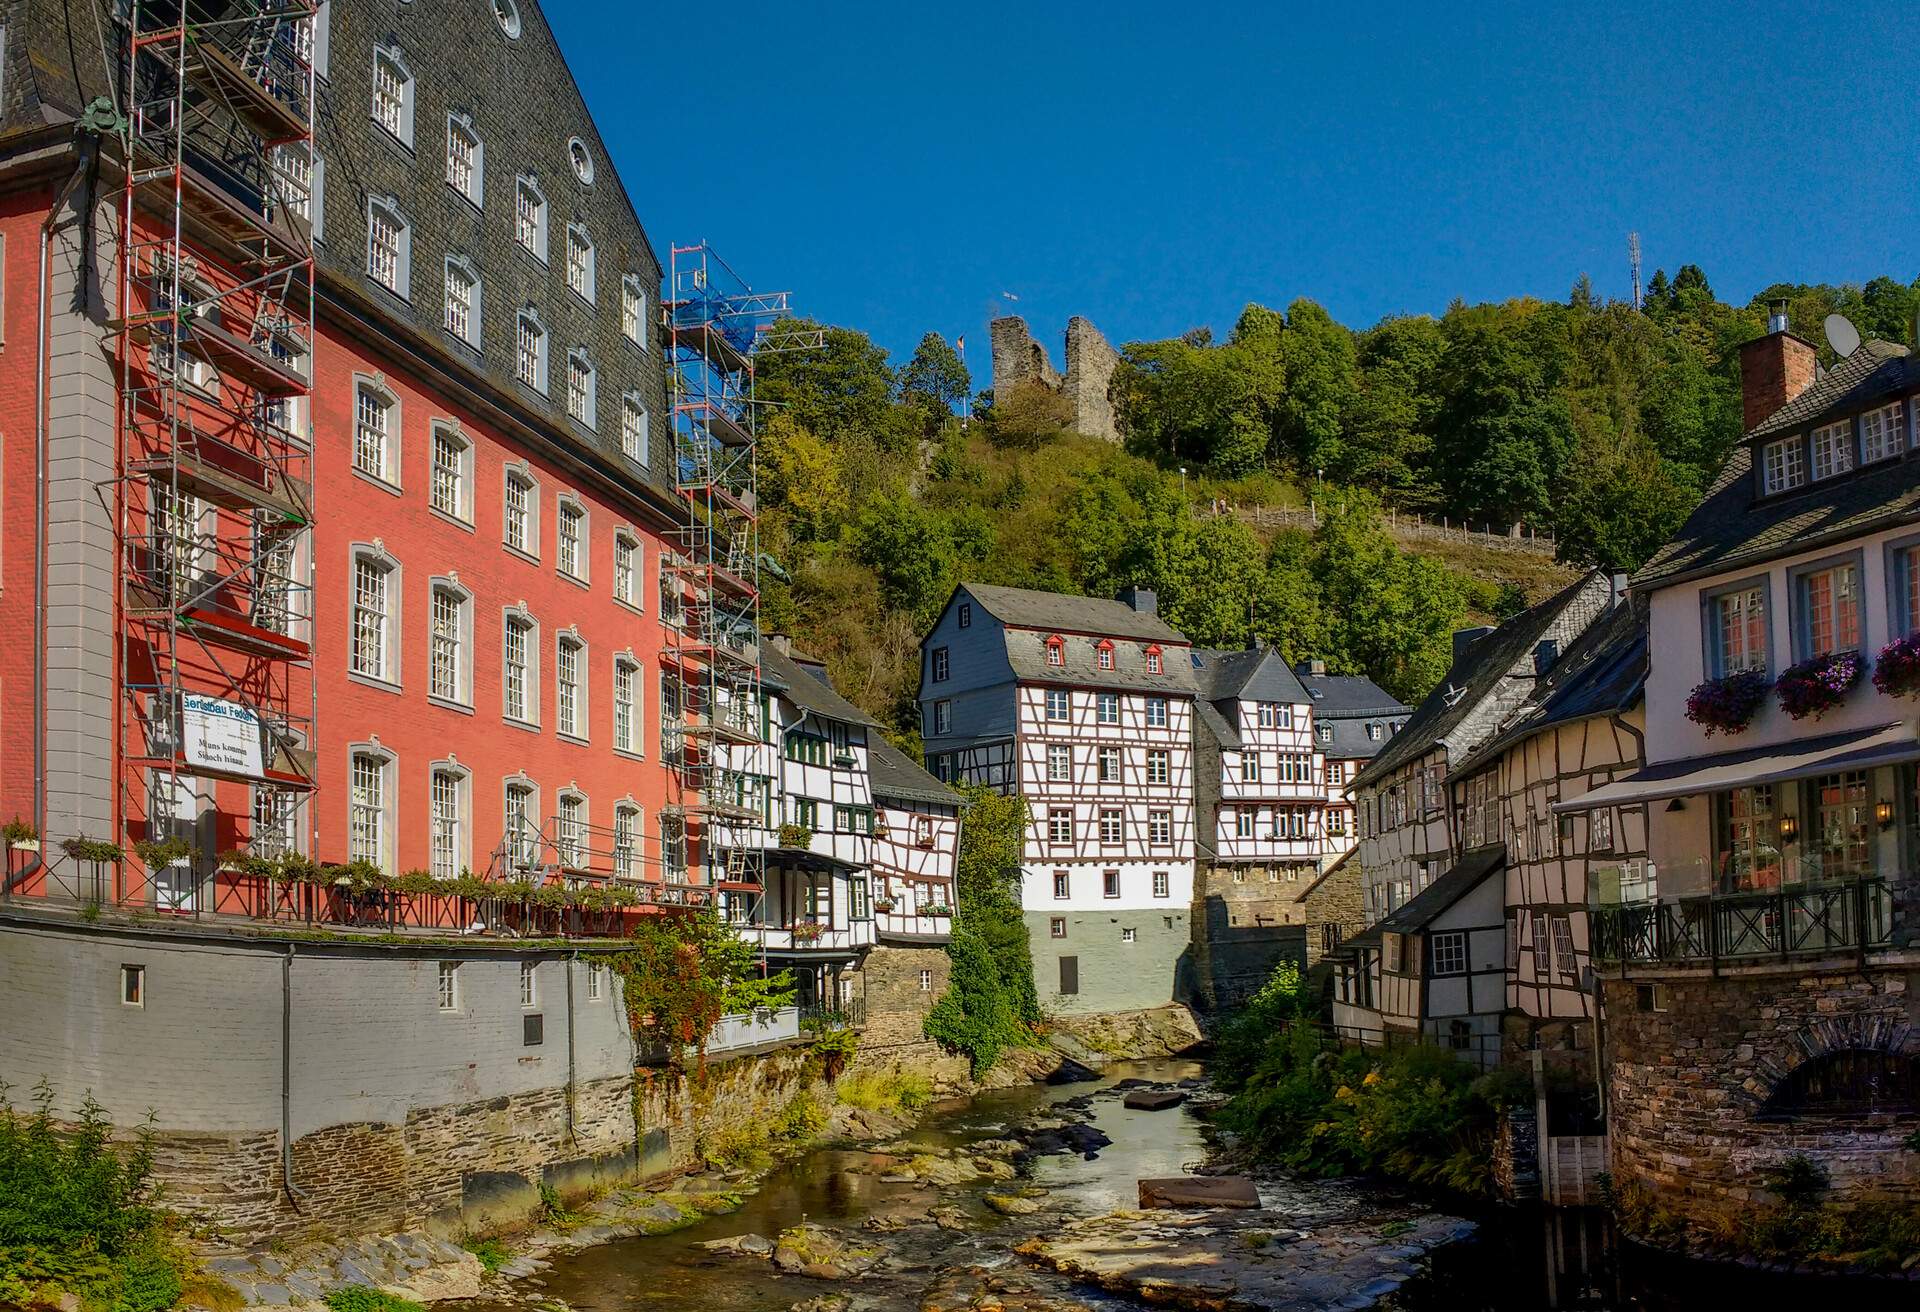 GERMANY_MONSCHAU_CANAL BY BUILDINGS IN TOWN